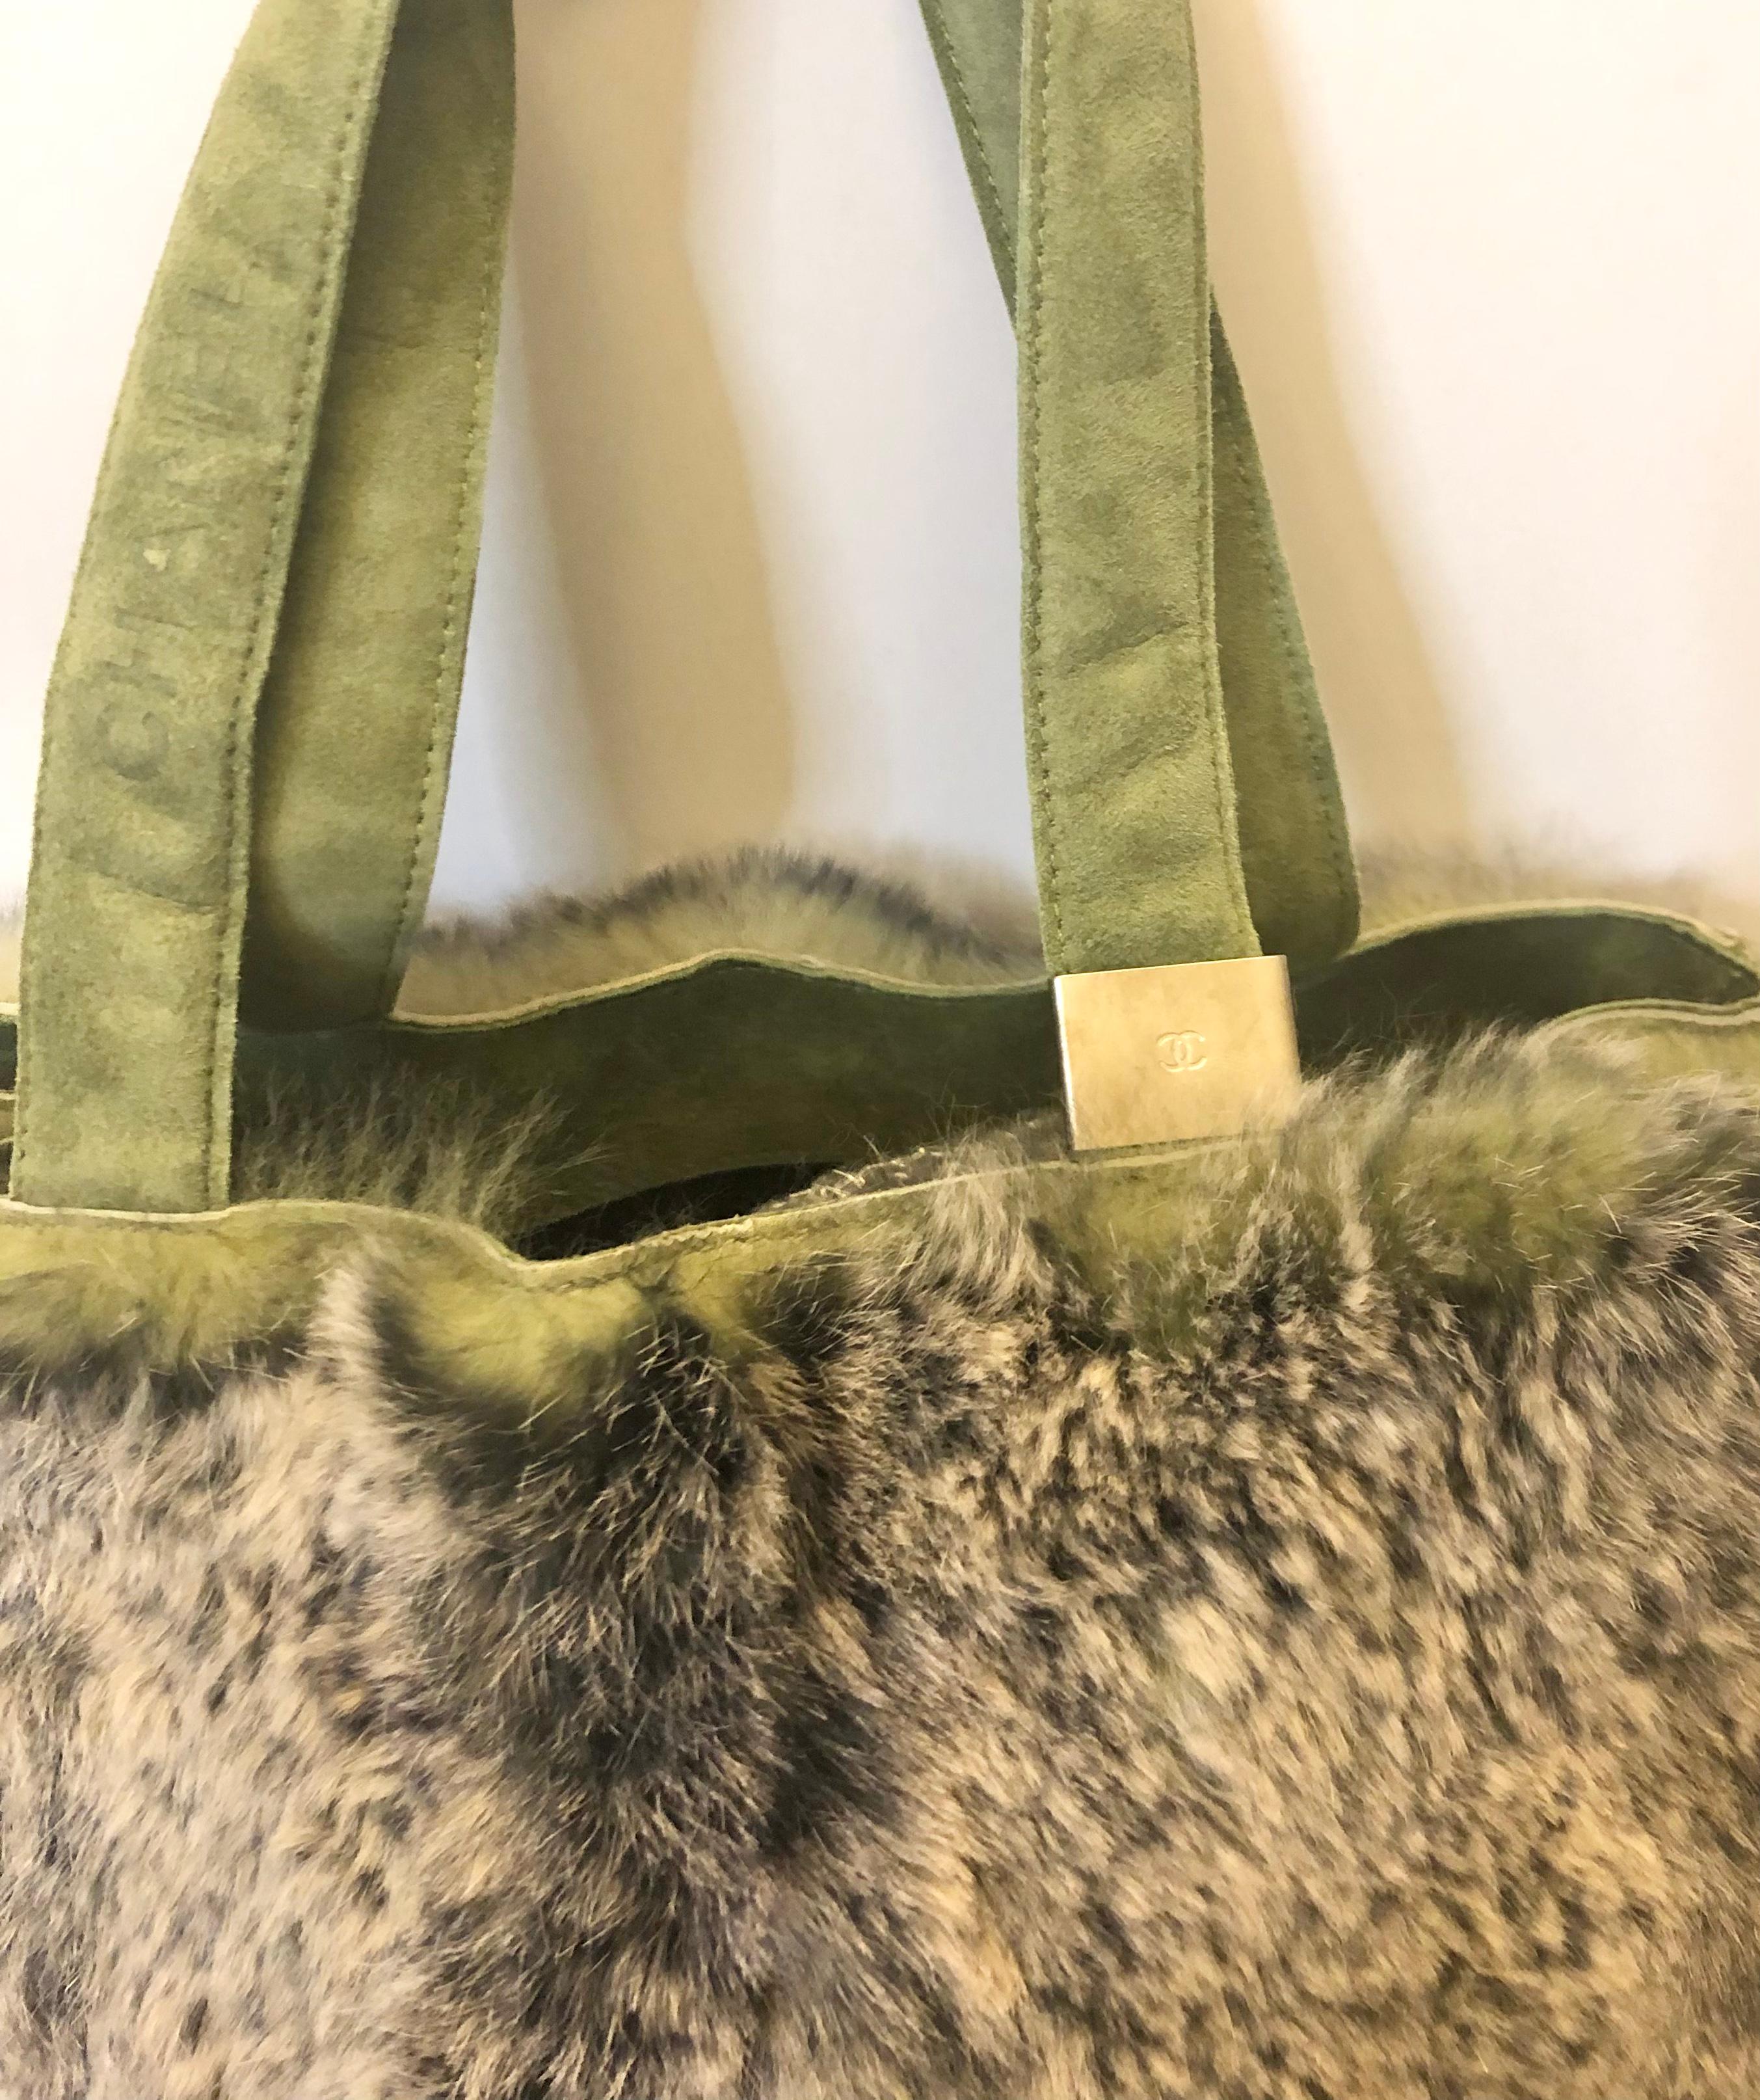 - Vintage Chanel Green “CC” Suede and Fur Oblong Tote Bag.

- Silver-toned hardware.

- a small zip pouch included. 

- Zip interior pocket. 

- Handle Drop: 7.5 inches. Height: 13.5 inches. Width: 15 inches. Depth: 4 inches. 

